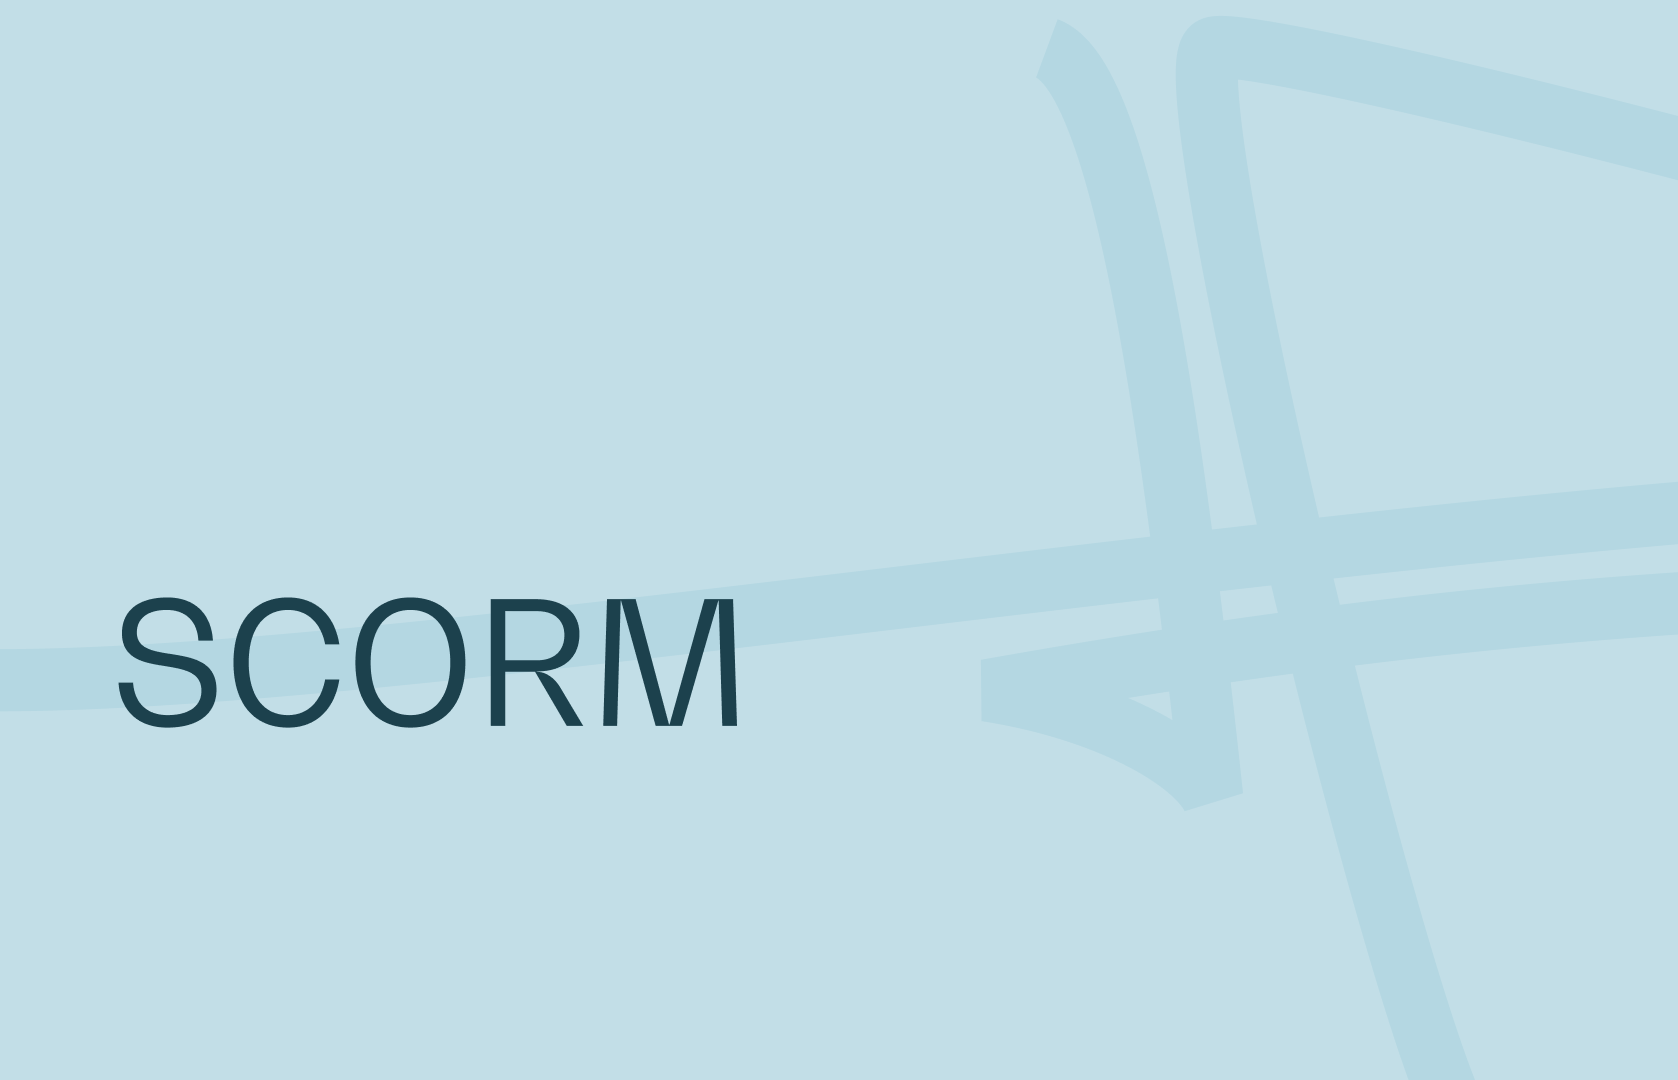 SCORM explanations and definitions